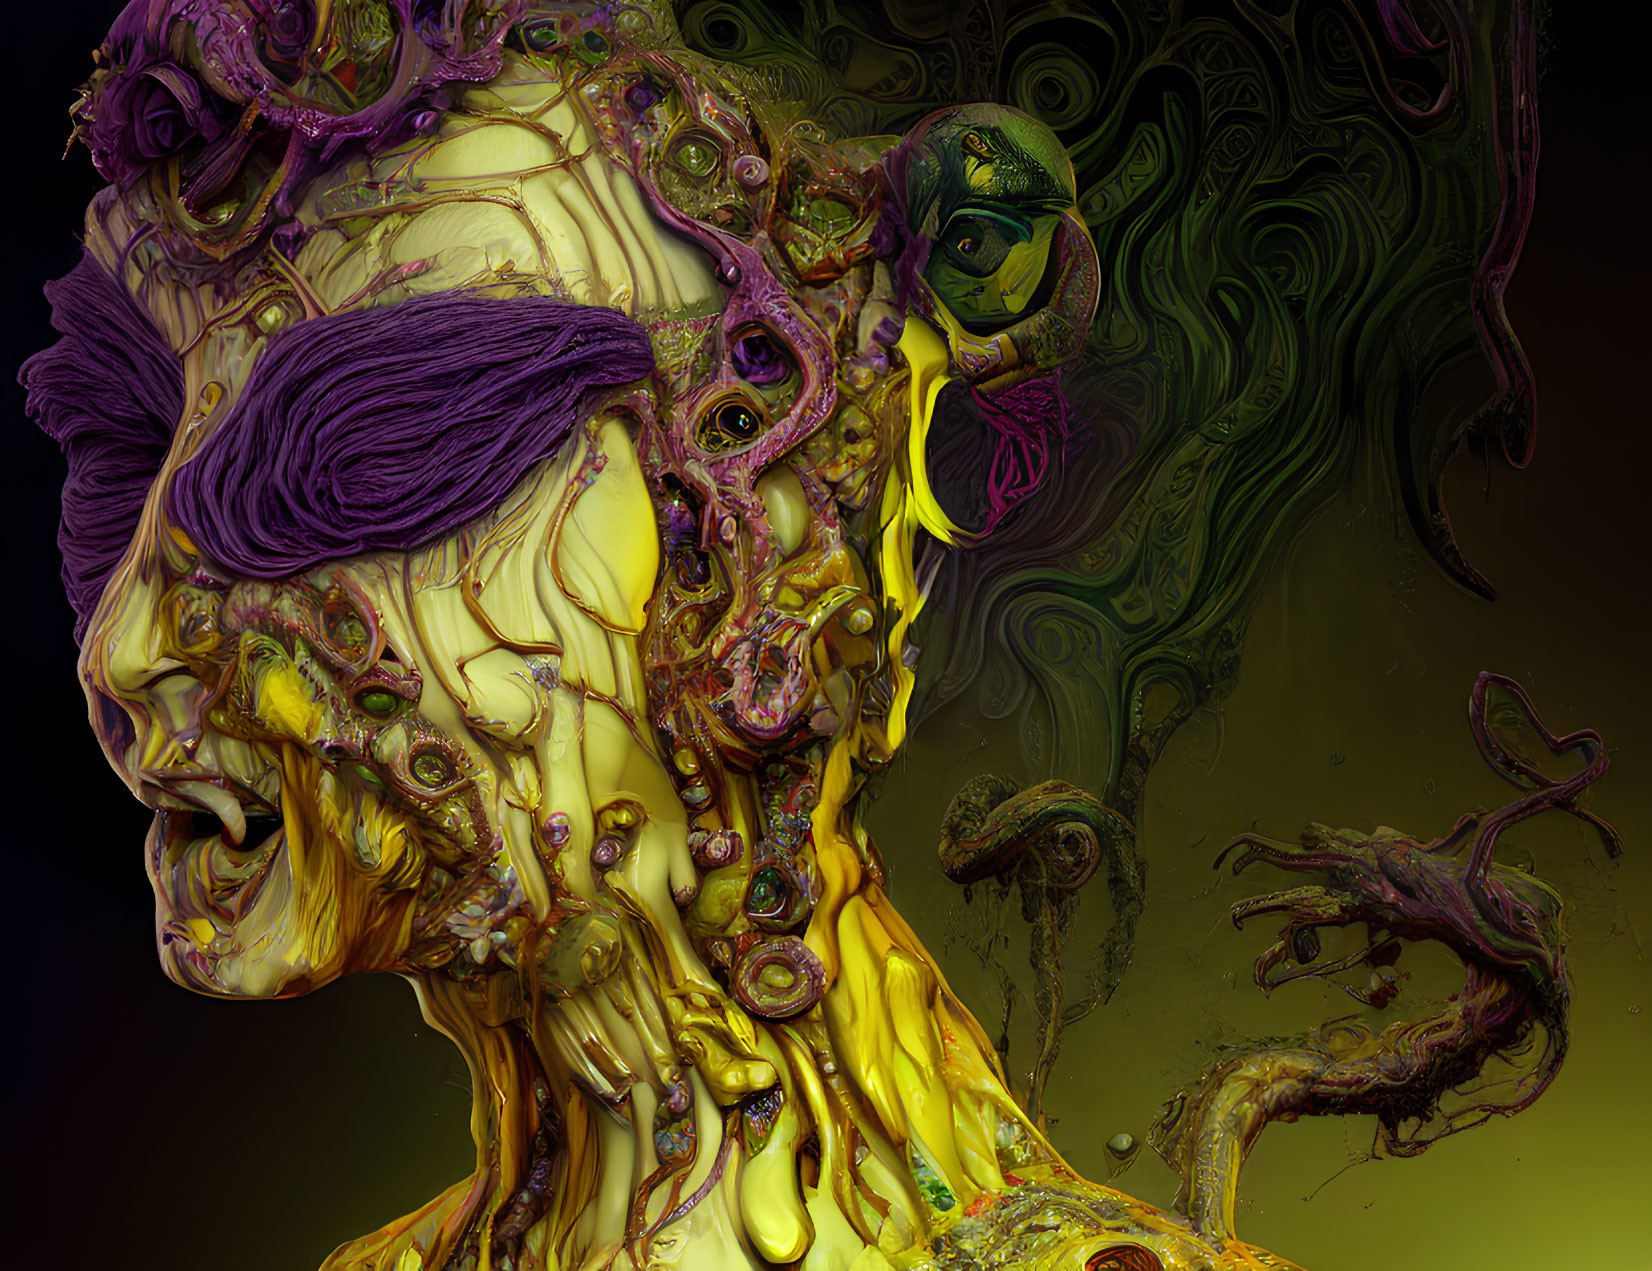 Colorful Surreal Fractal Image with Abstract Human-like Faces